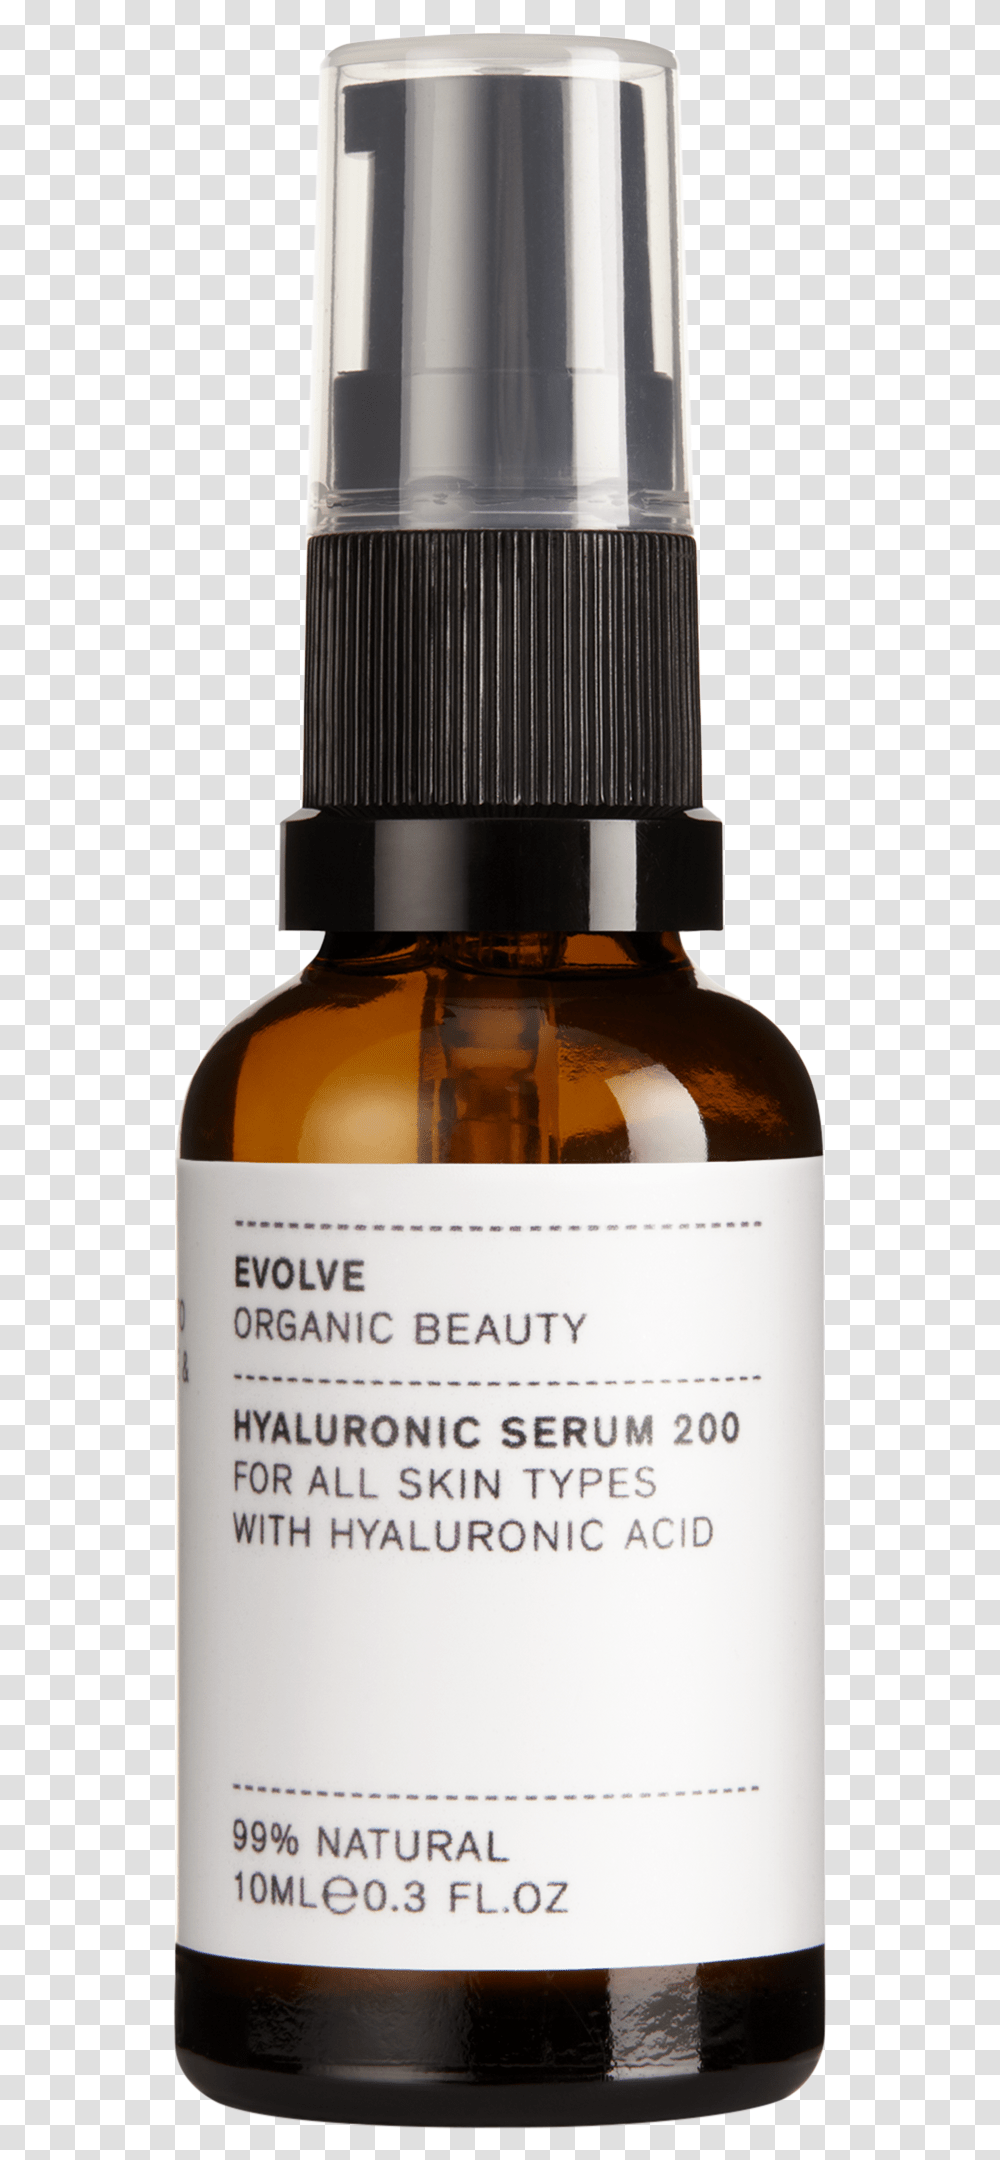 Vegan And Cruelty Free Beauty Natural Beauty Products Best, Bottle, Cosmetics, Mixer, Appliance Transparent Png